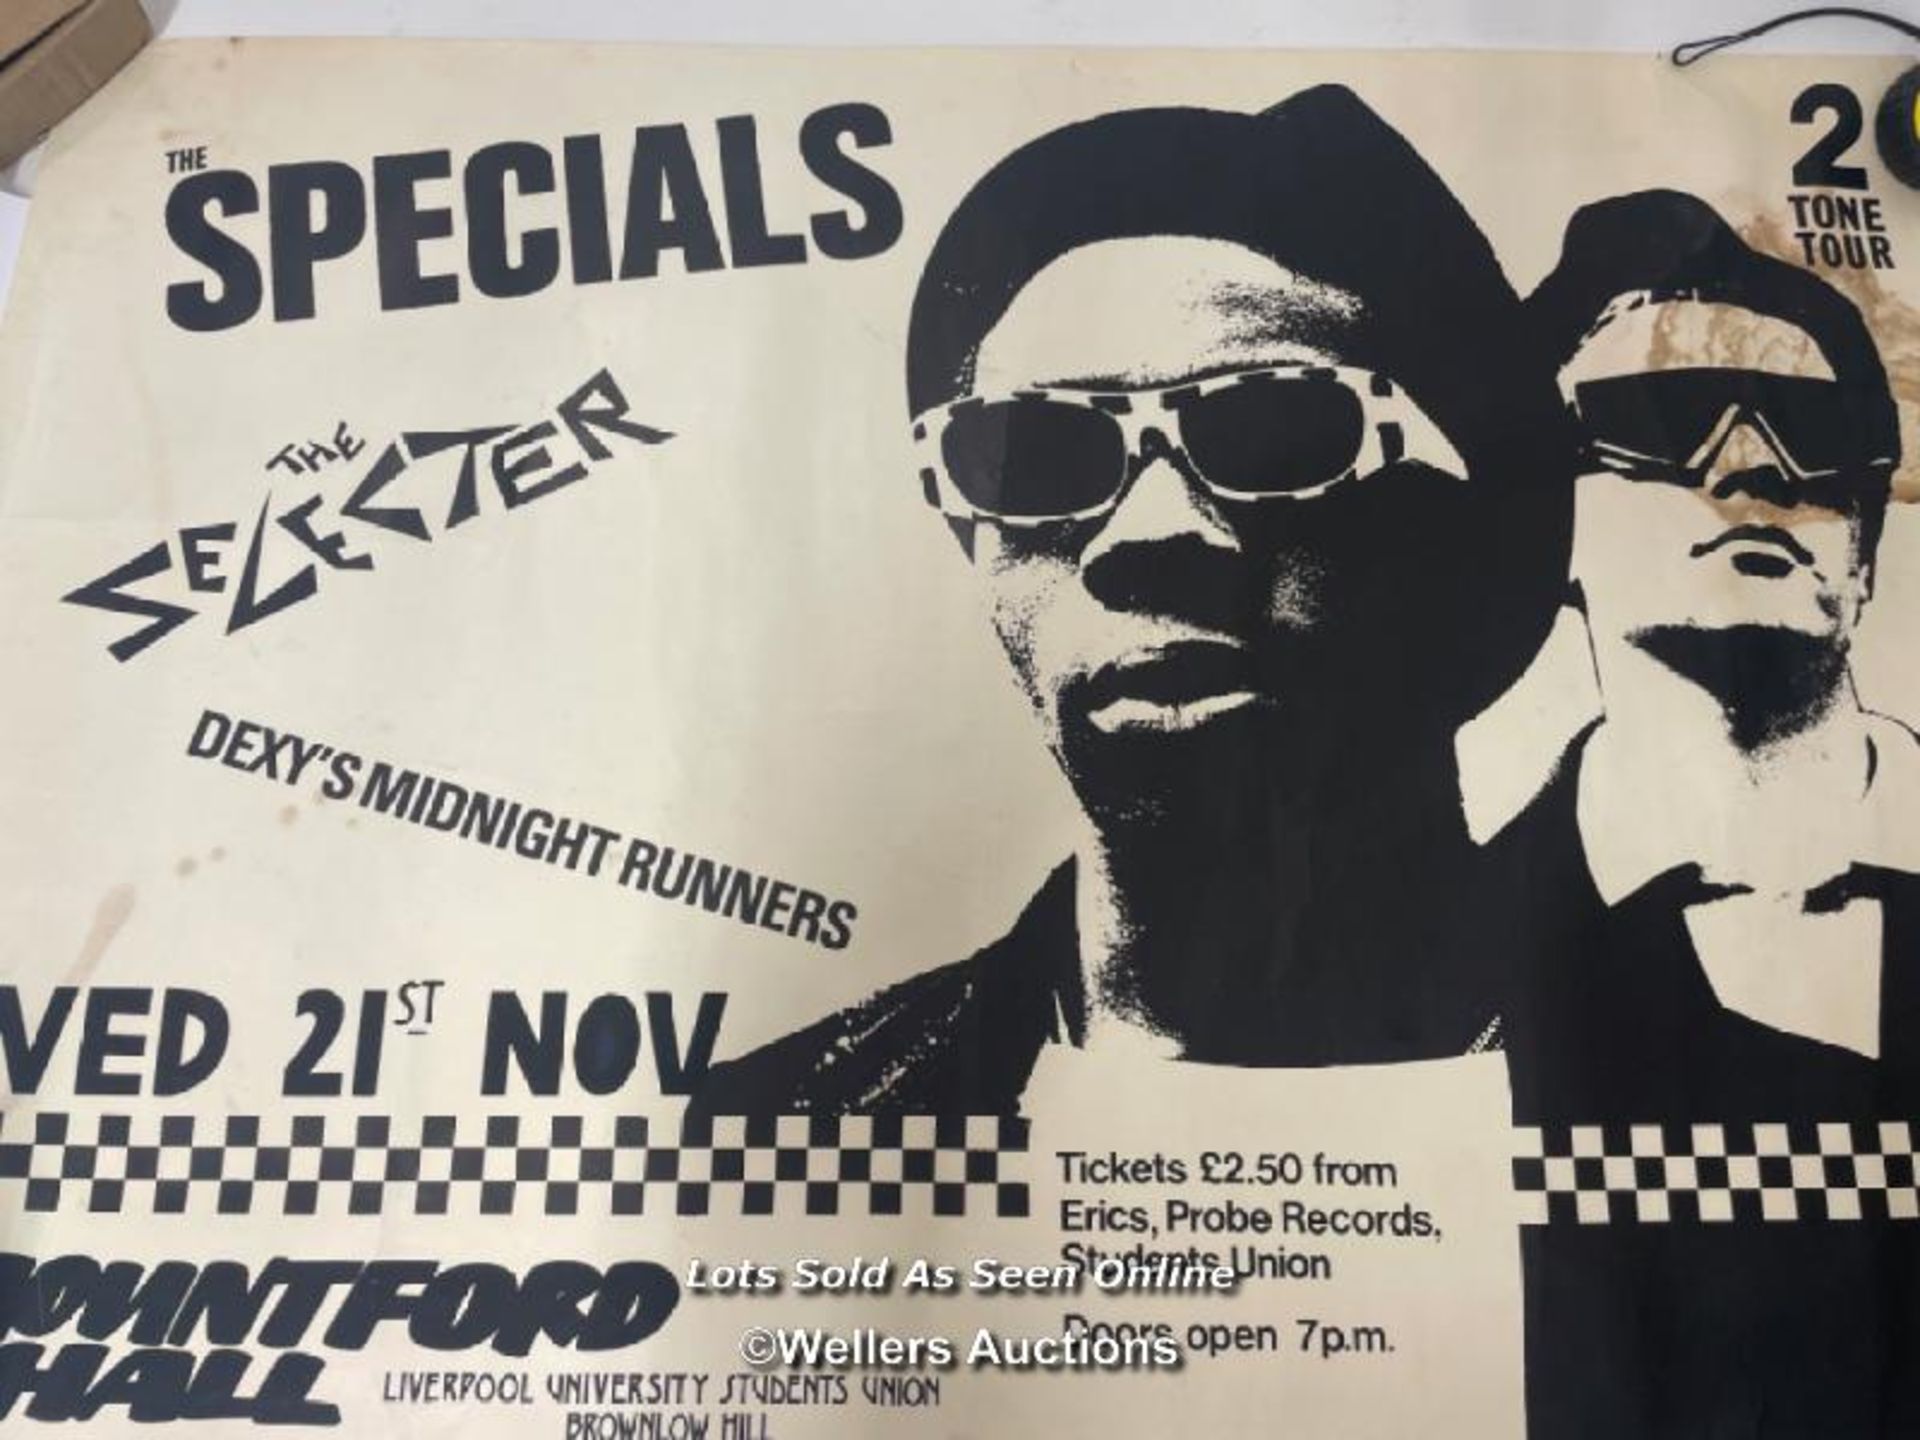 *RARE, THE SPECIALS POSTER FOR THE 2 TONE TOUR, MOUNTFORD HALL LIVERPOOL UNIVERSITY ALSO FEATURING